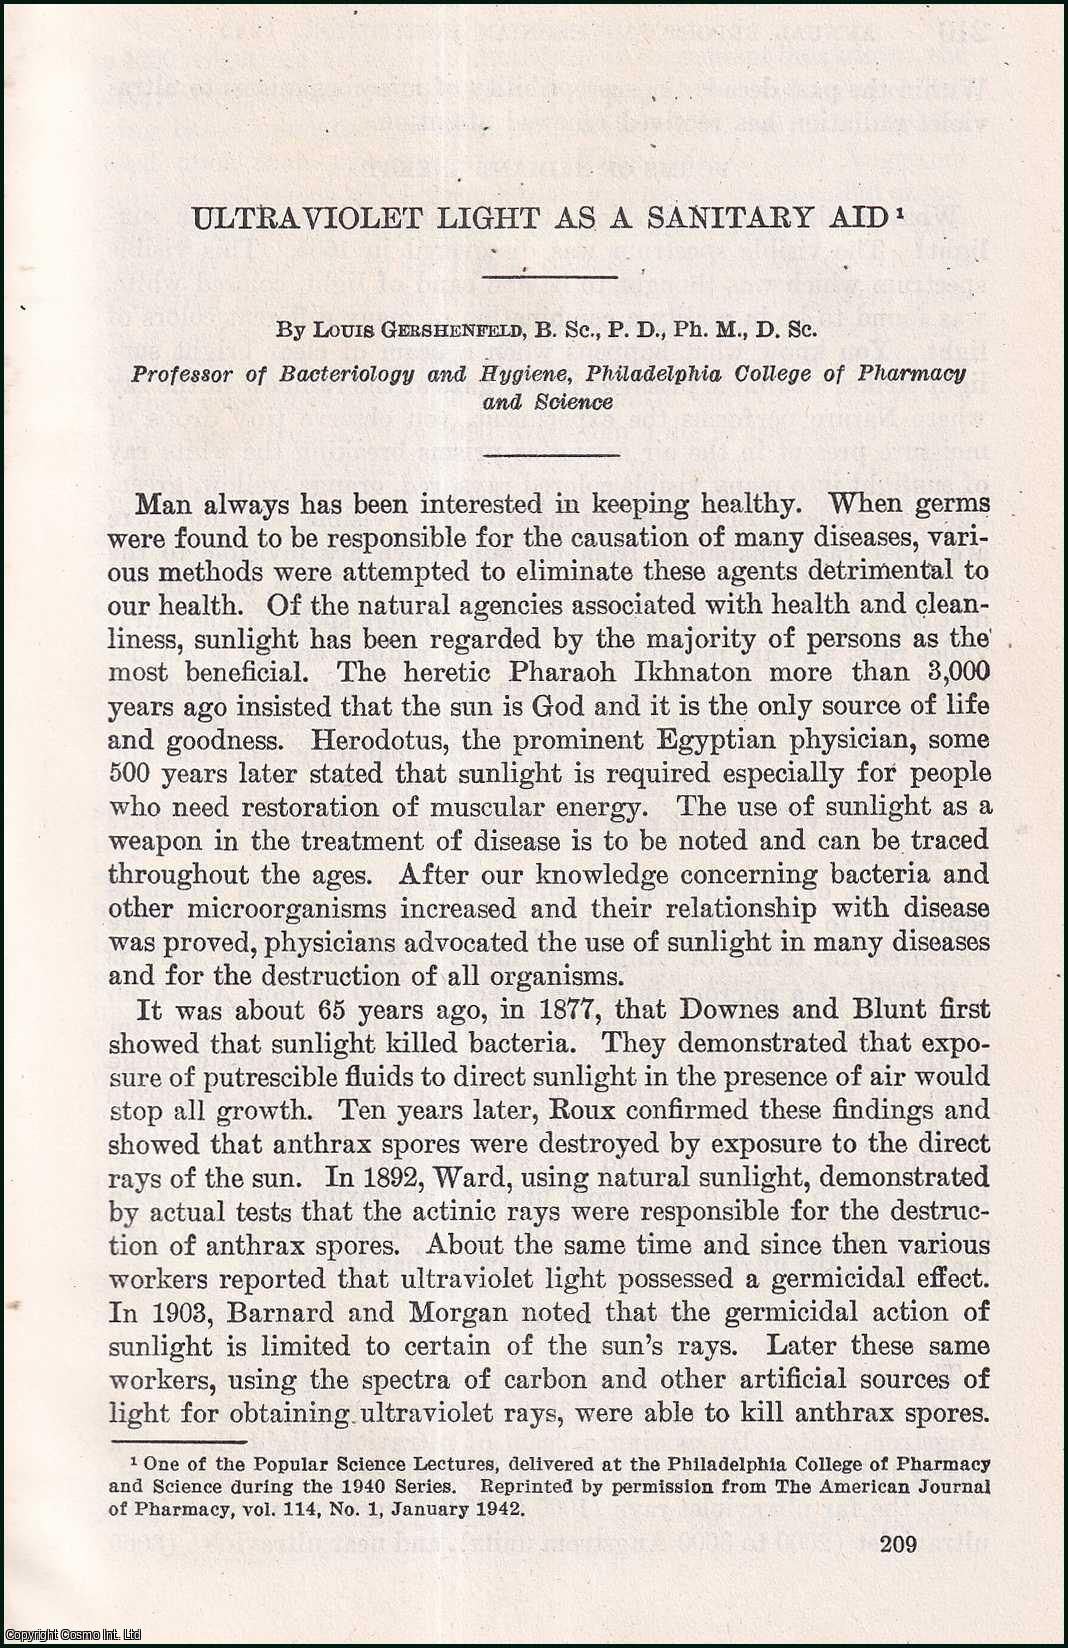 Louis Gershenfeld, B. Sc., P.D., Ph.M., D. Sc. Professor of Bacteriology & Hygiene, Philadelphia College of Pharmacy & Science. - Ultraviolet Light as a Sanitary Aid. An uncommon original article from the Report of the Smithsonian Institution, 1942.